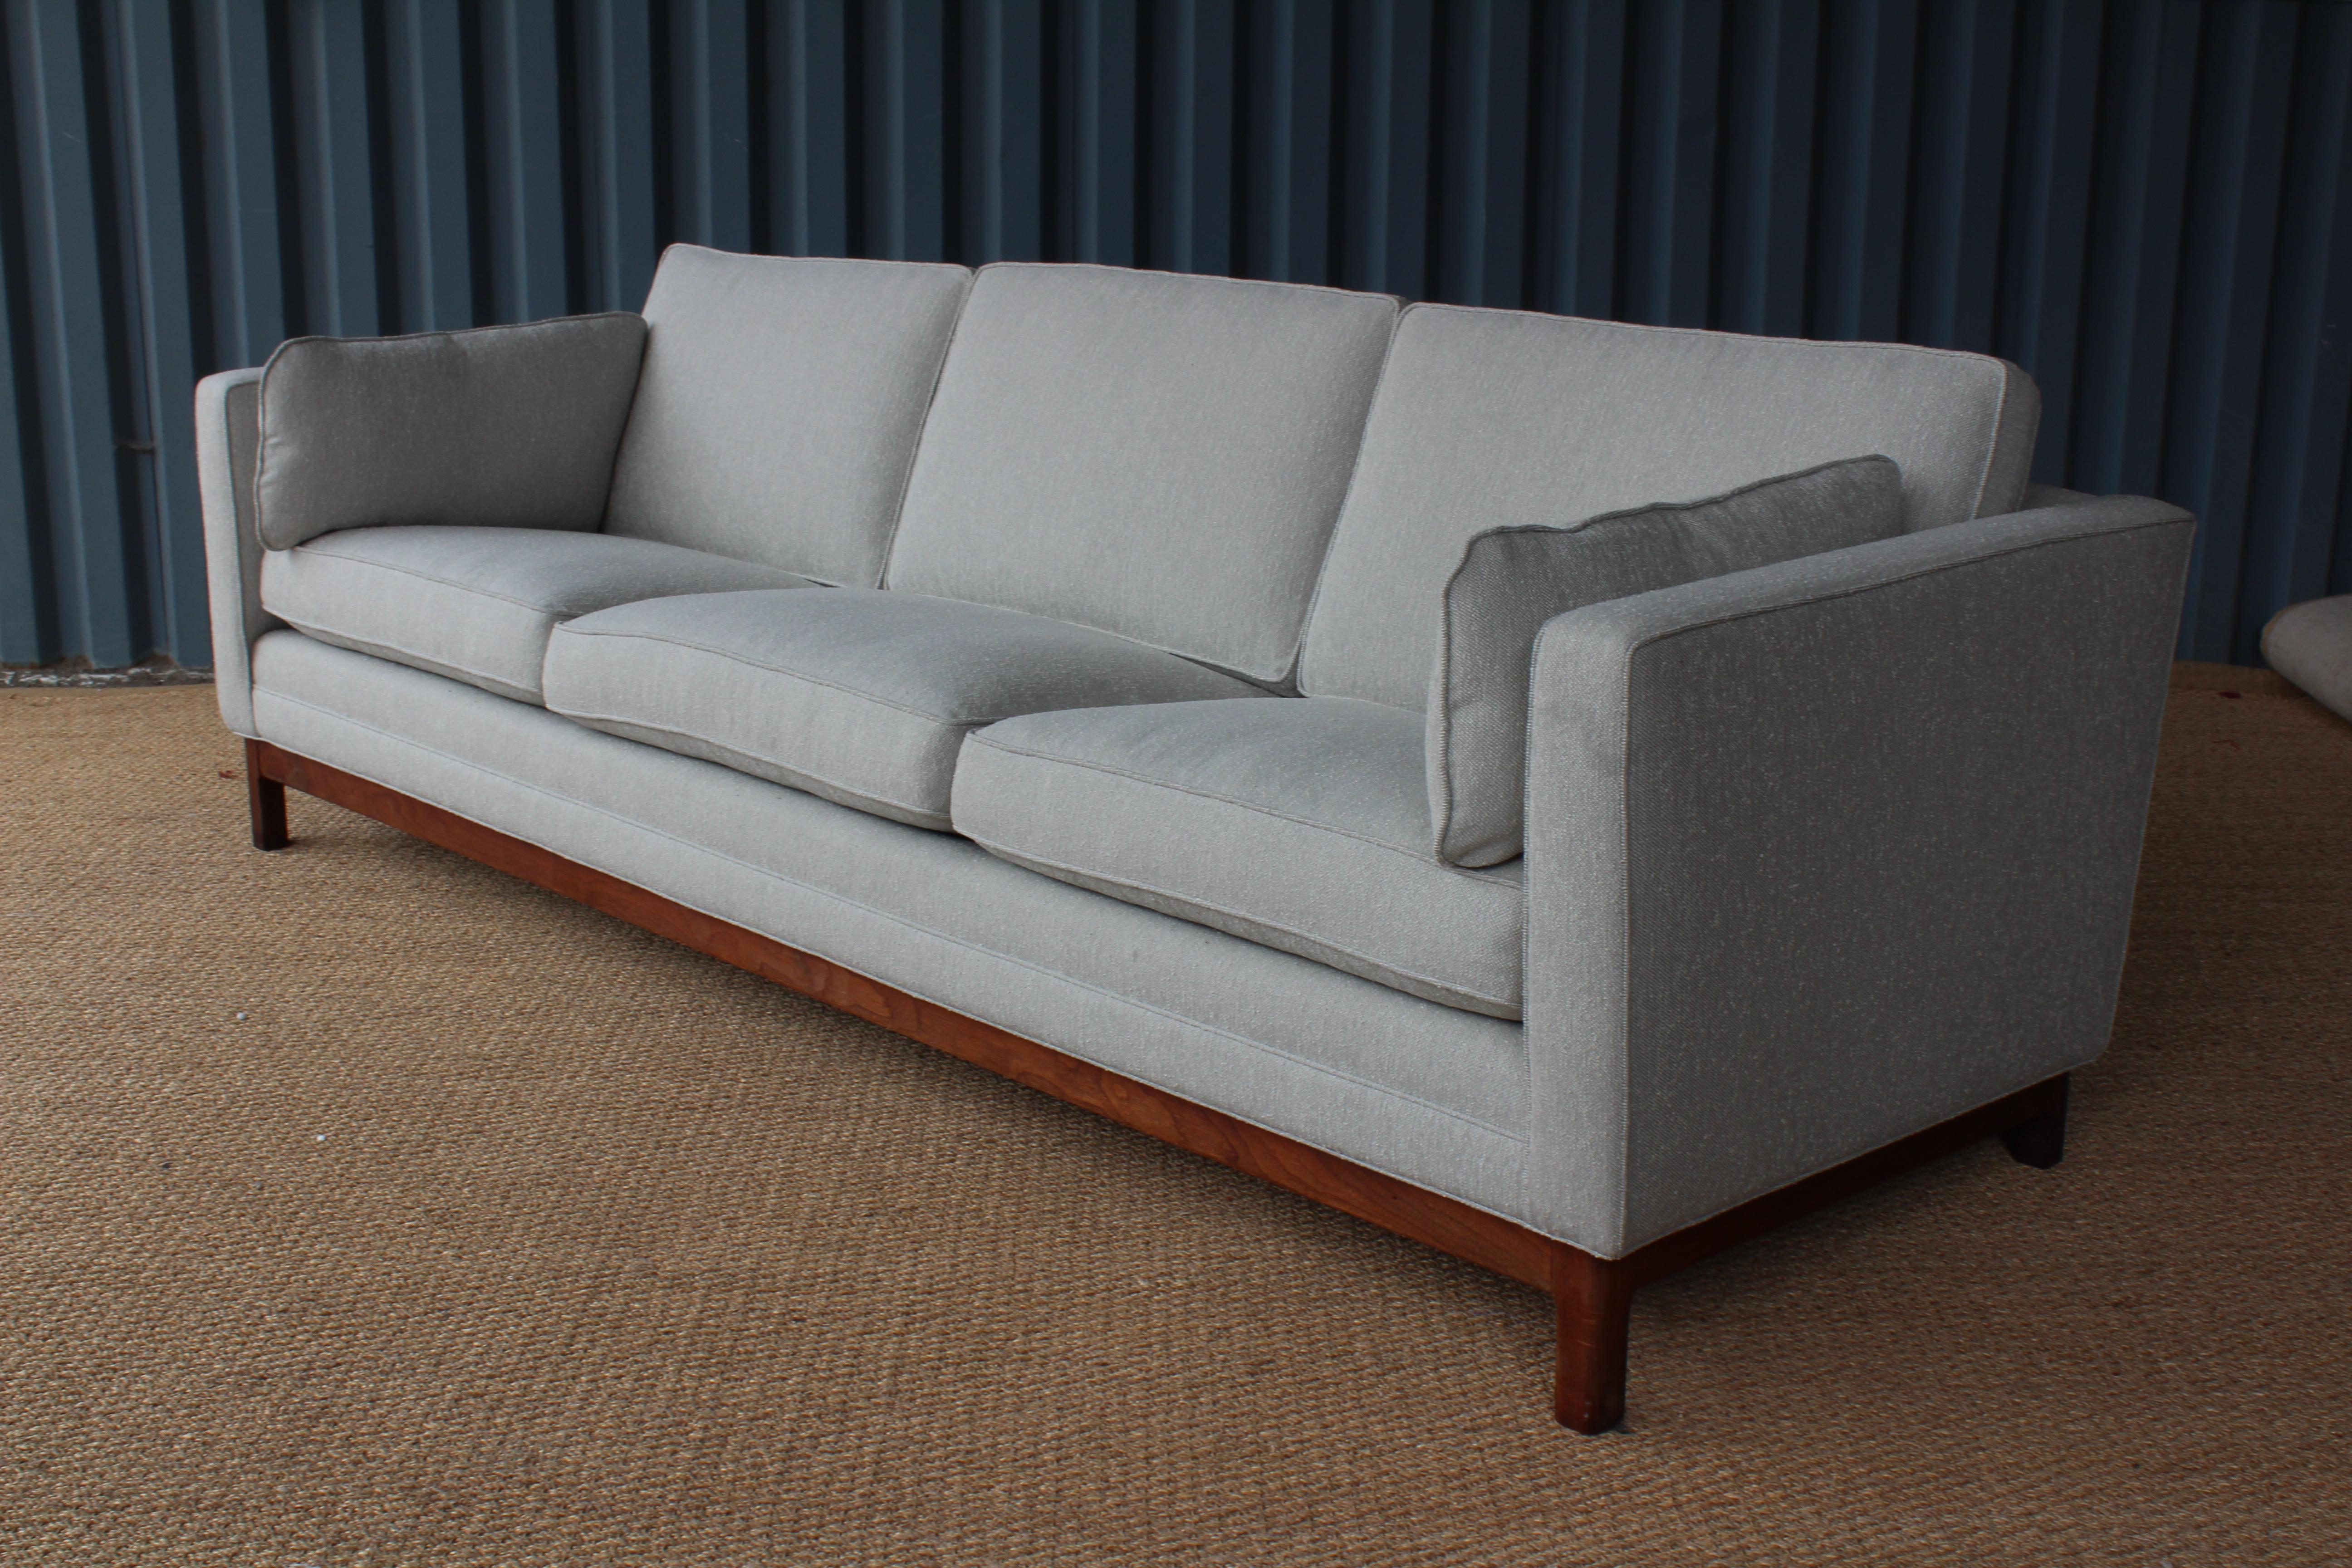 1950s sofa designed by Folke Ohlsson for DUX, Sweden, 1950s. New performance woven upholstery. Solid walnut base.